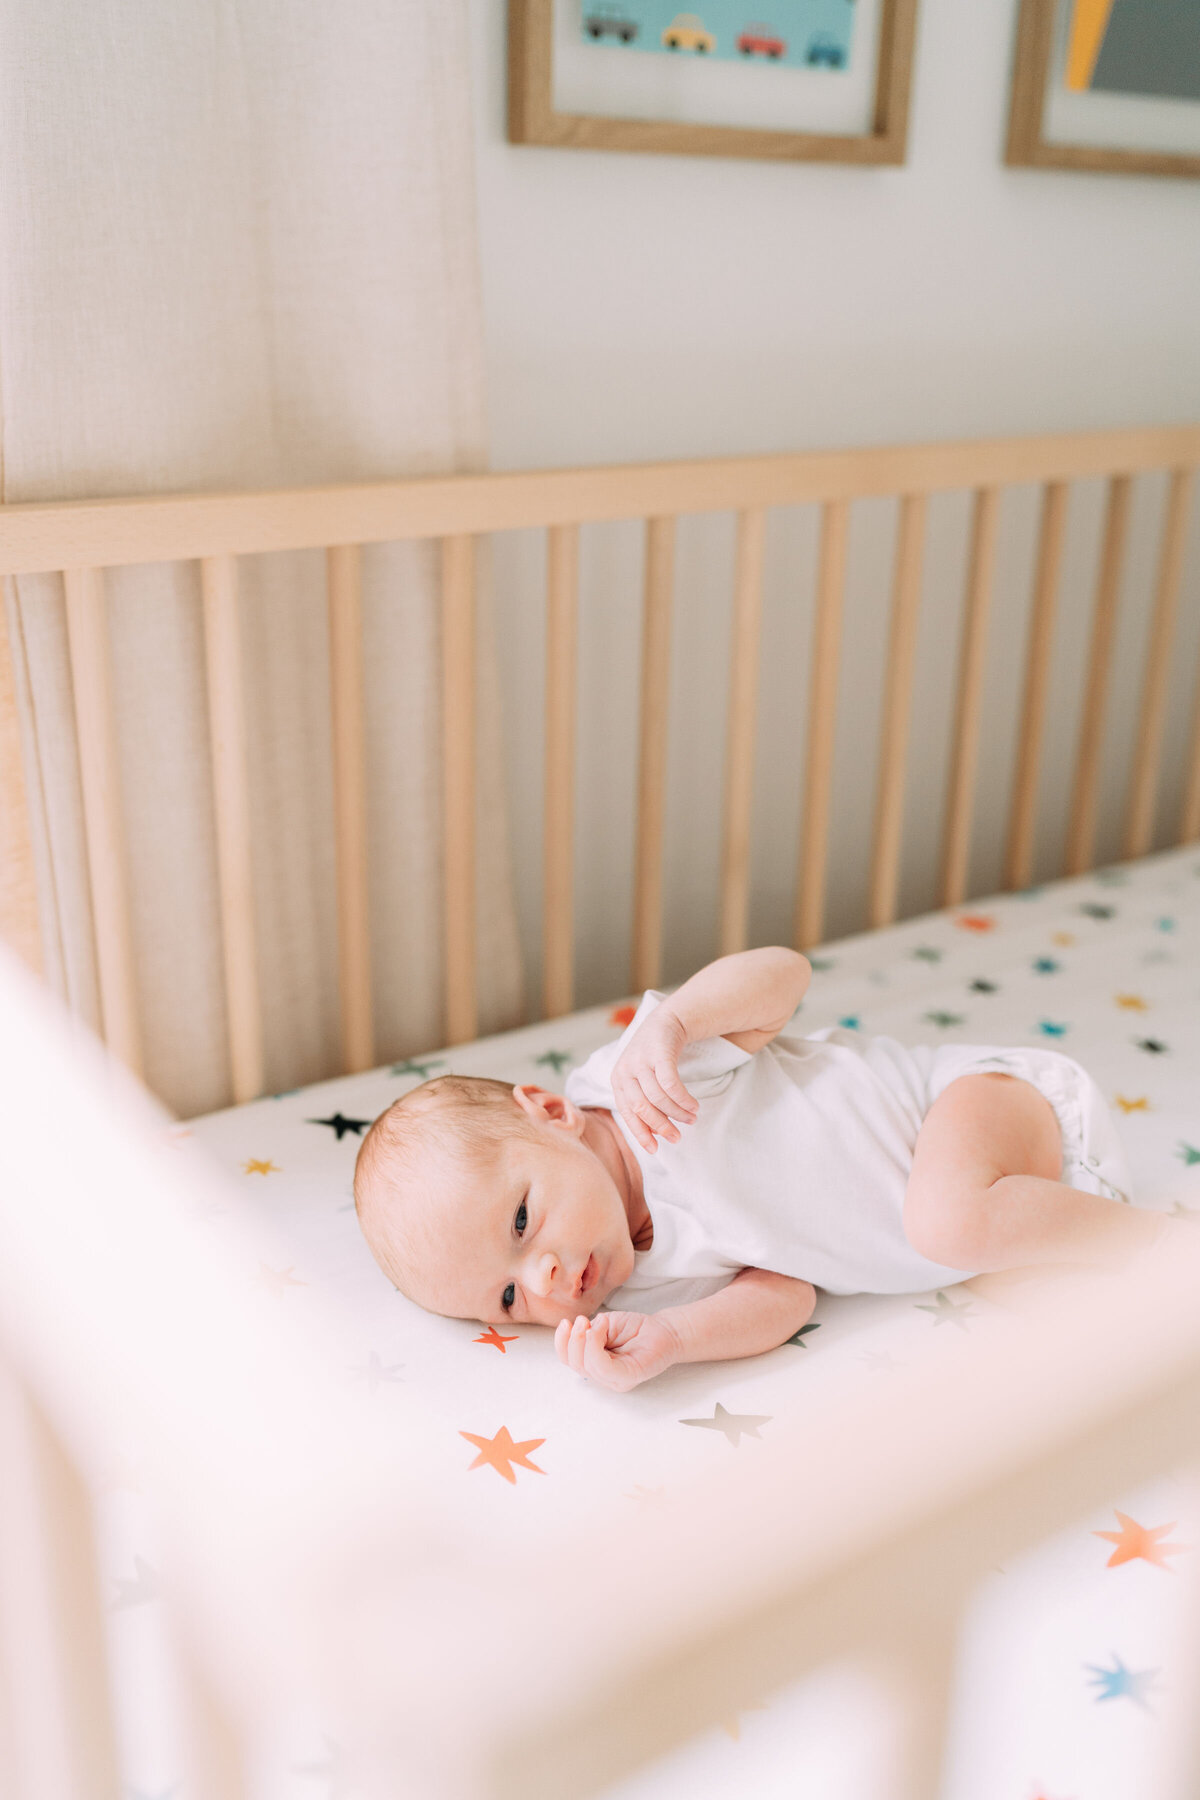 baby boy lies in crib with colorful star sheets